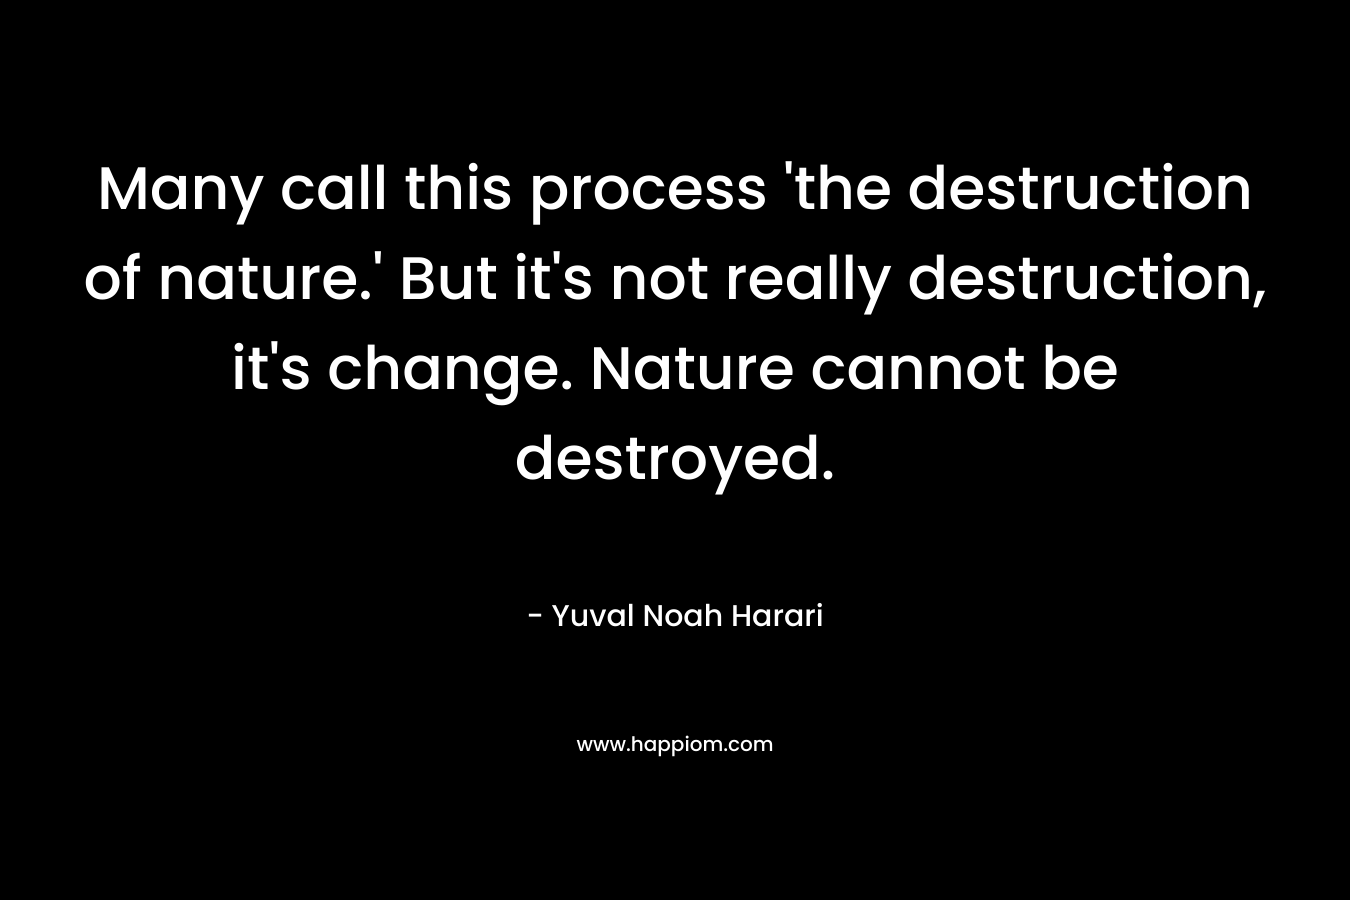 Many call this process 'the destruction of nature.' But it's not really destruction, it's change. Nature cannot be destroyed.